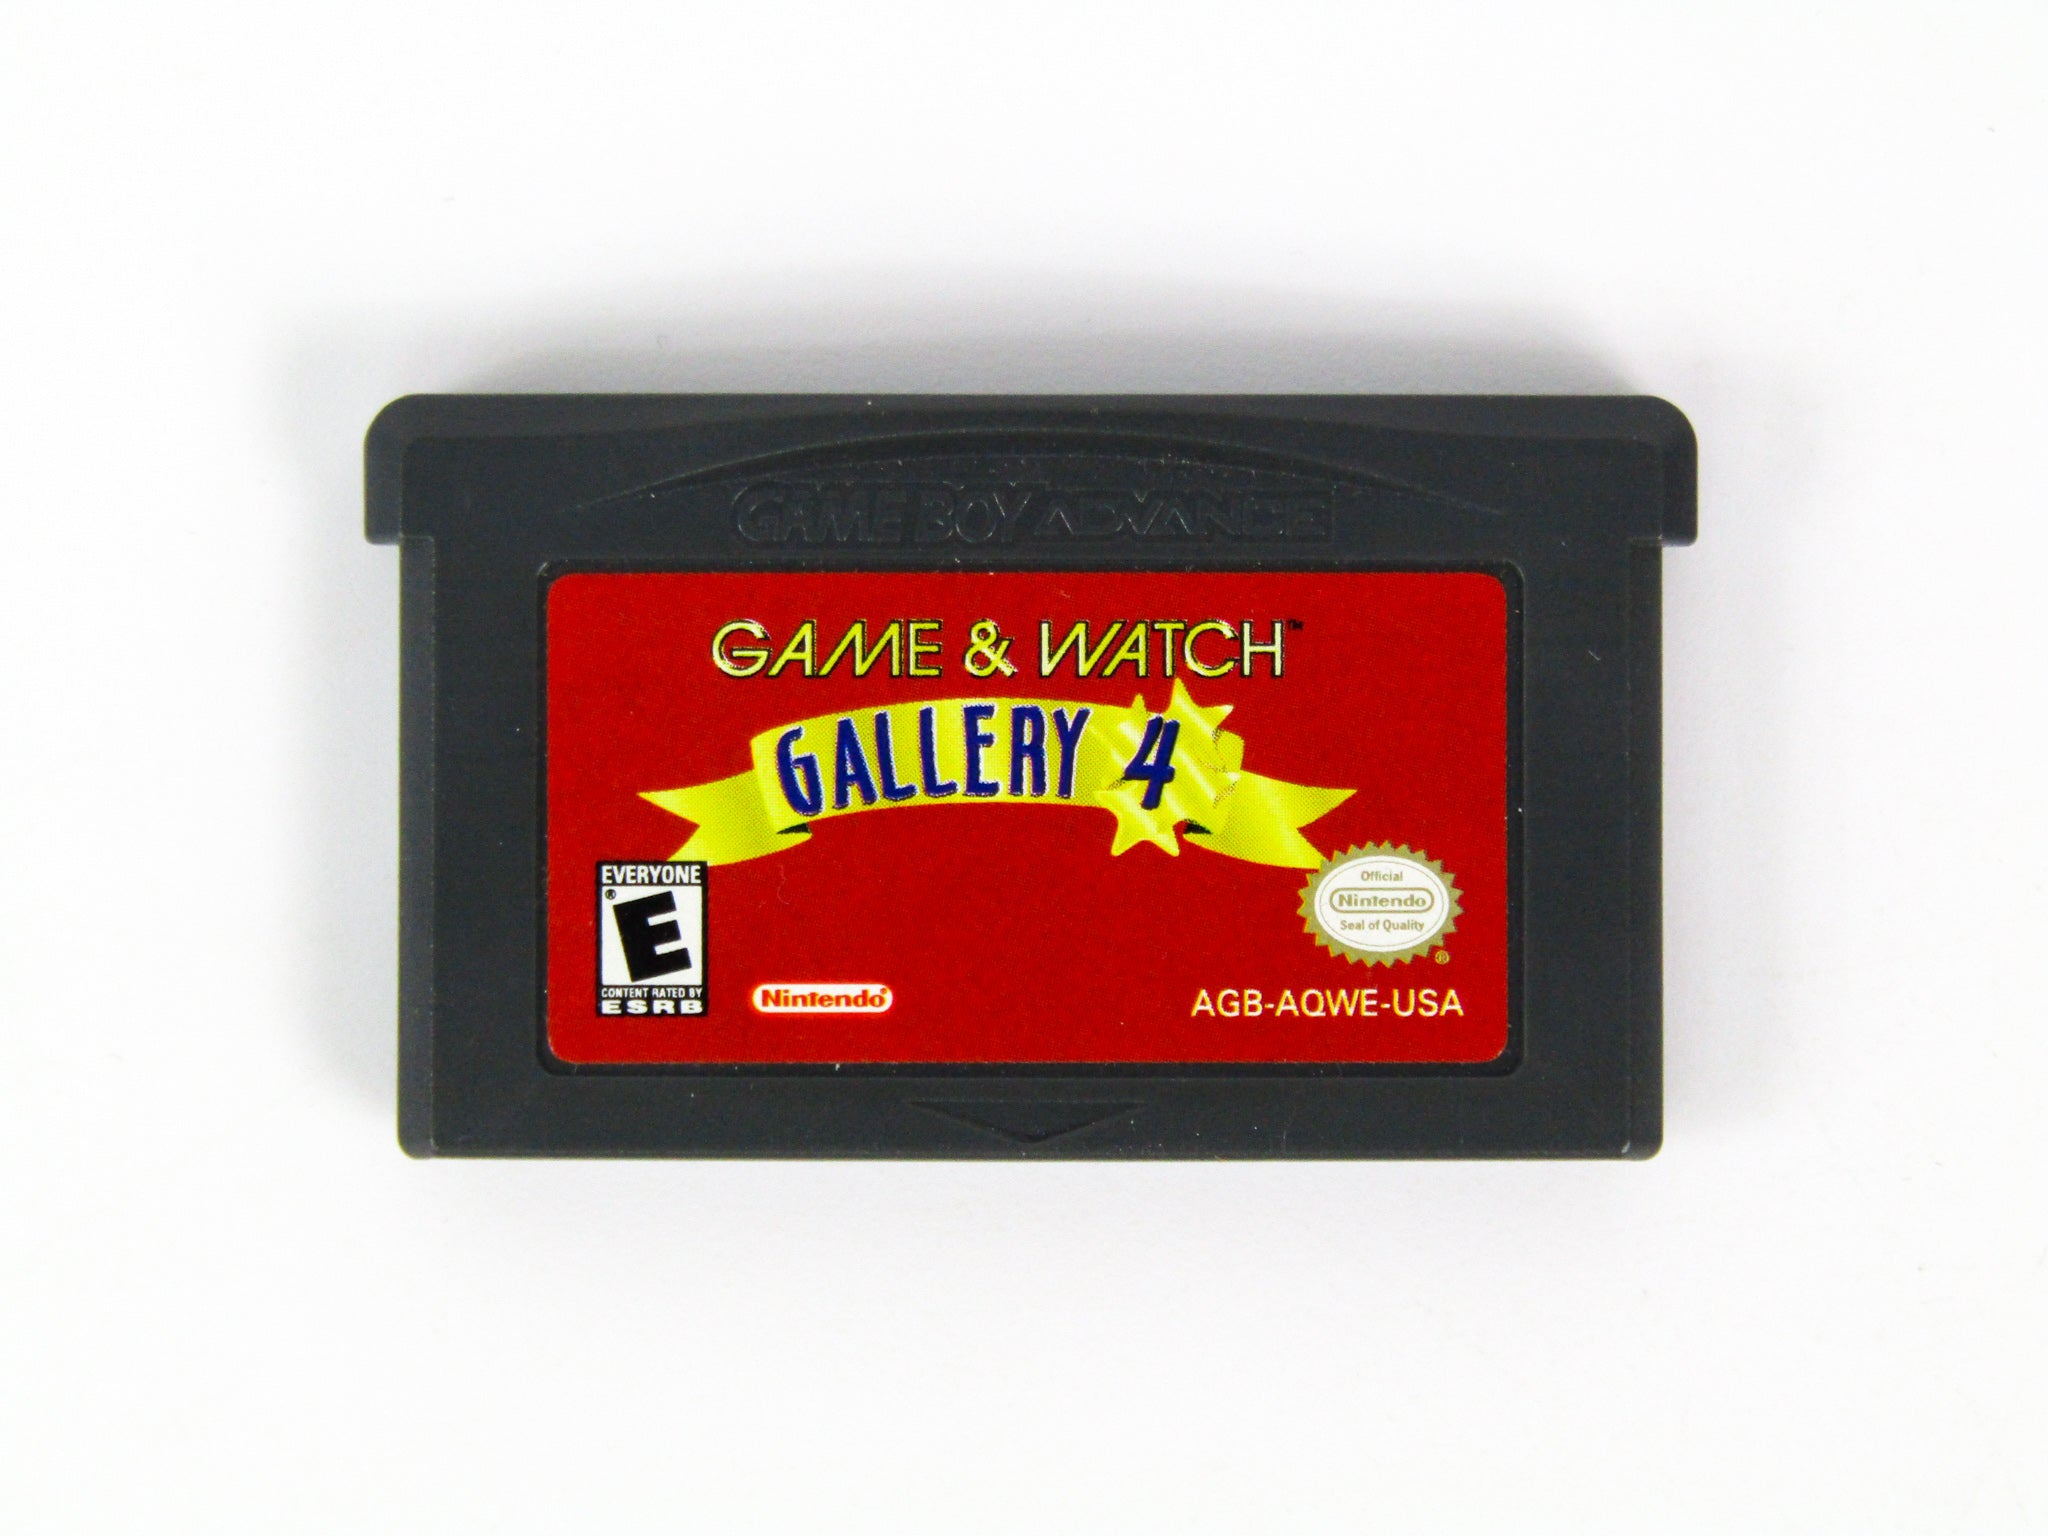 Game & Watch Gallery 4 [USA] - Nintendo Gameboy Advance (GBA) rom download